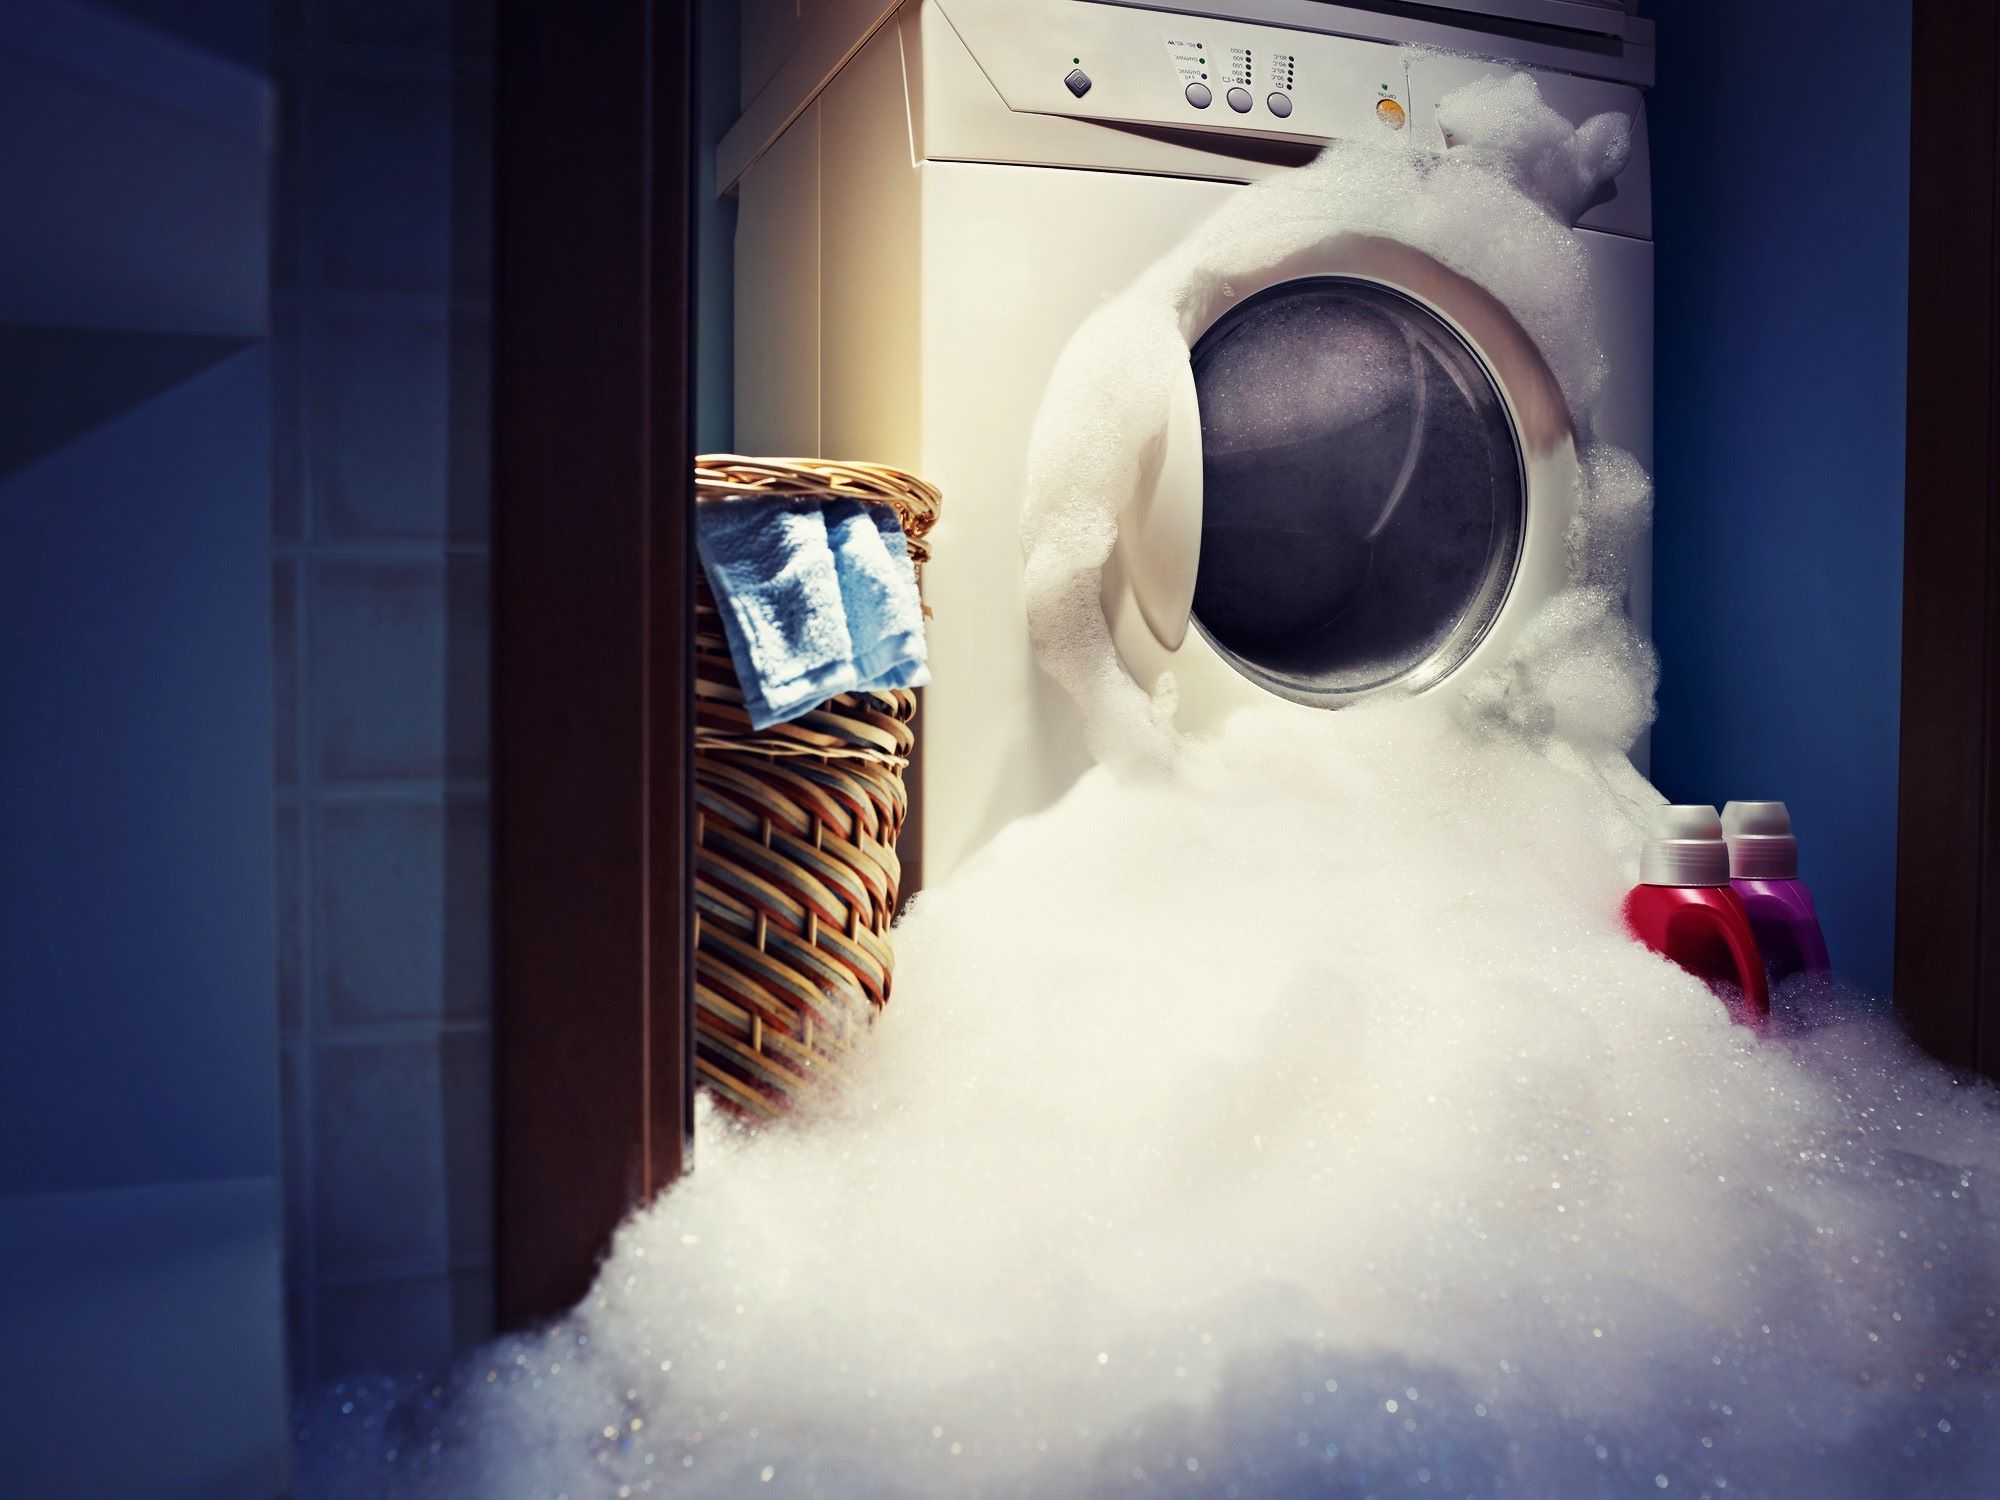 What Happens If You Put Too Much Soap In The Washing Machine